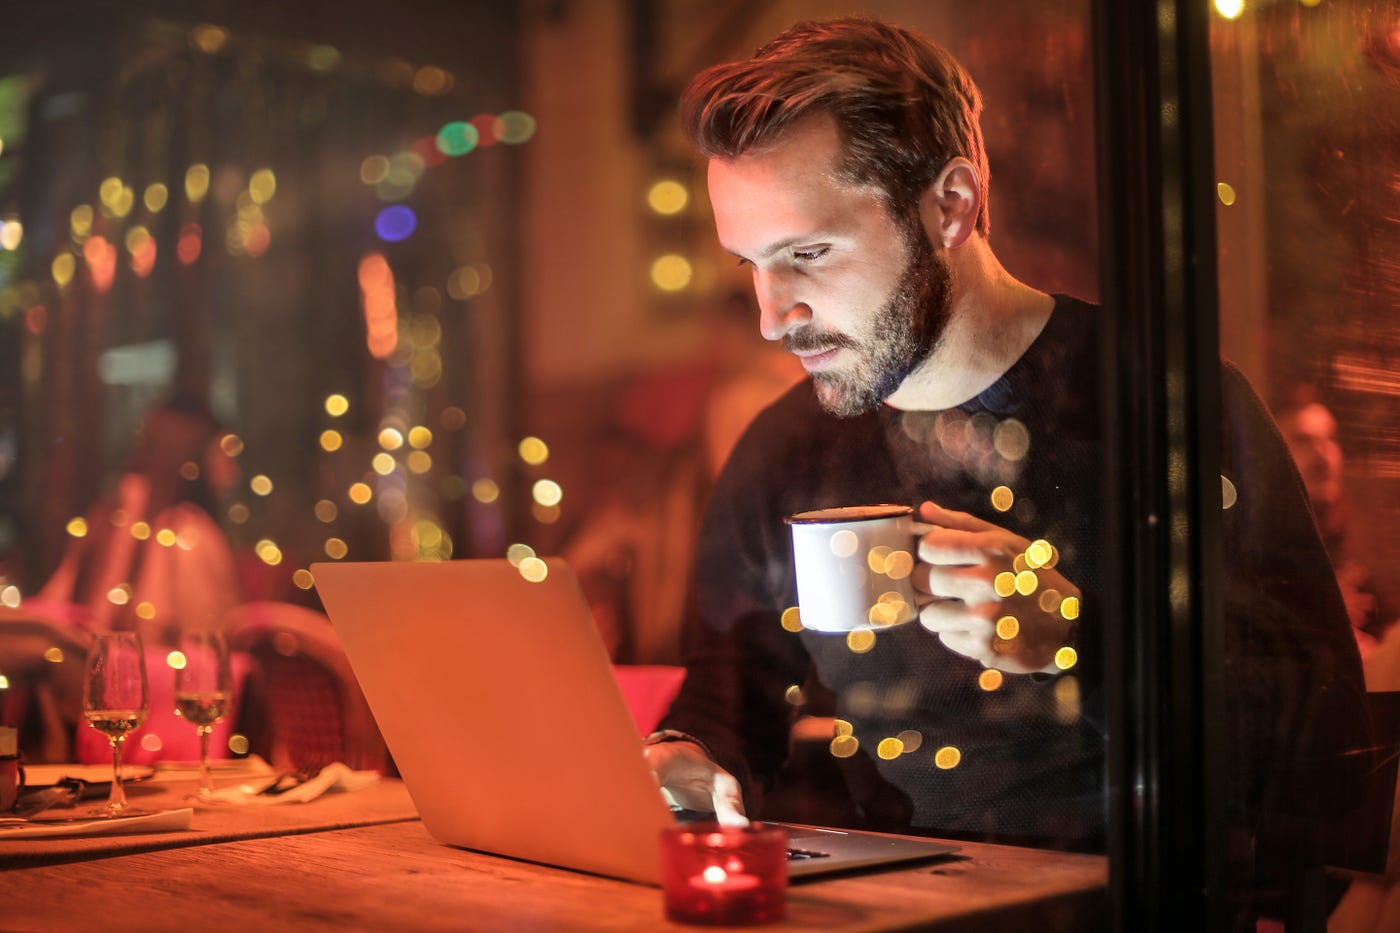 A man looking at a laptop with a cup of coffee in a reflective attitude.